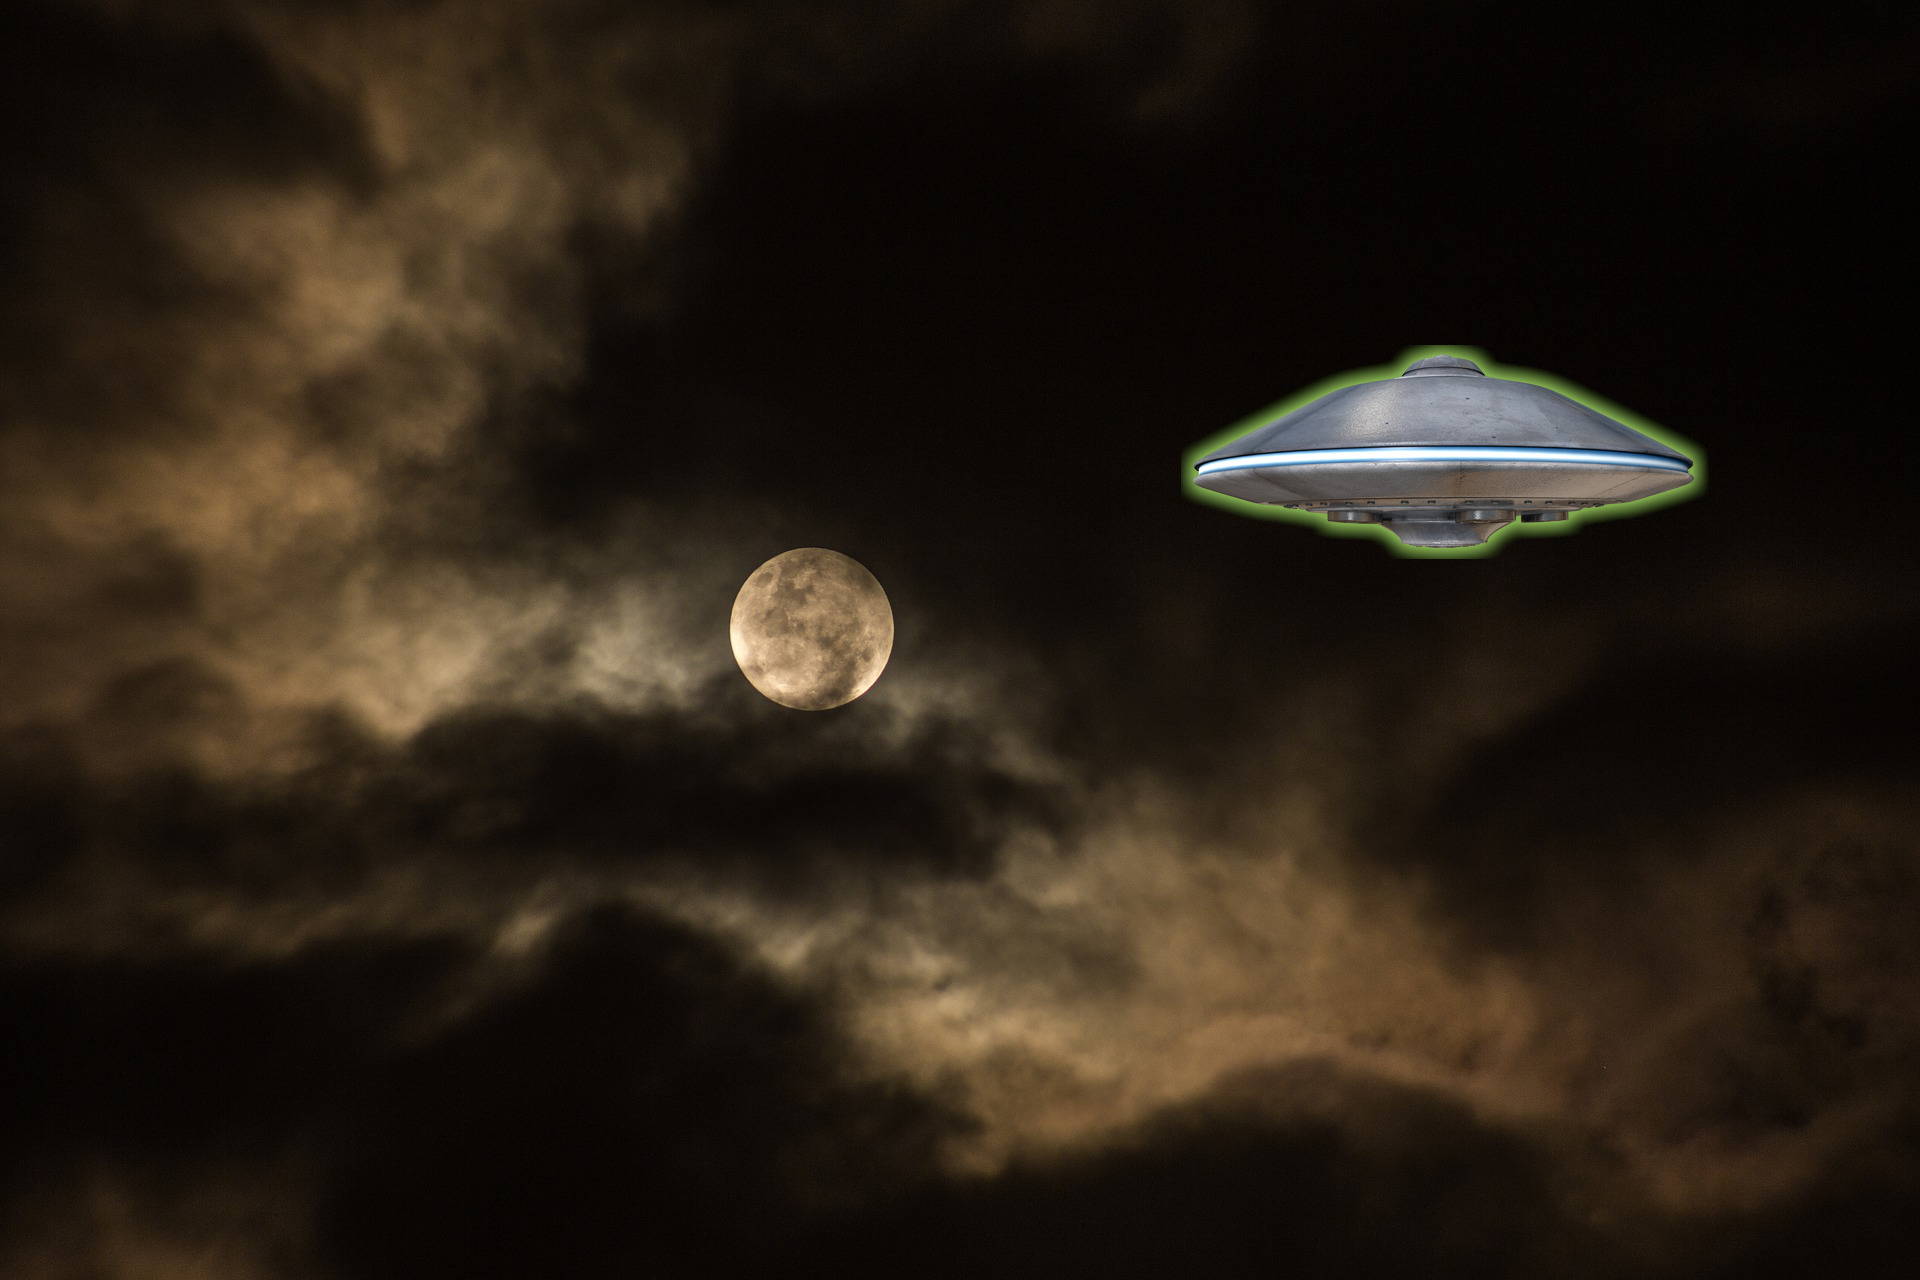 A depiction of a UFO near the full moon